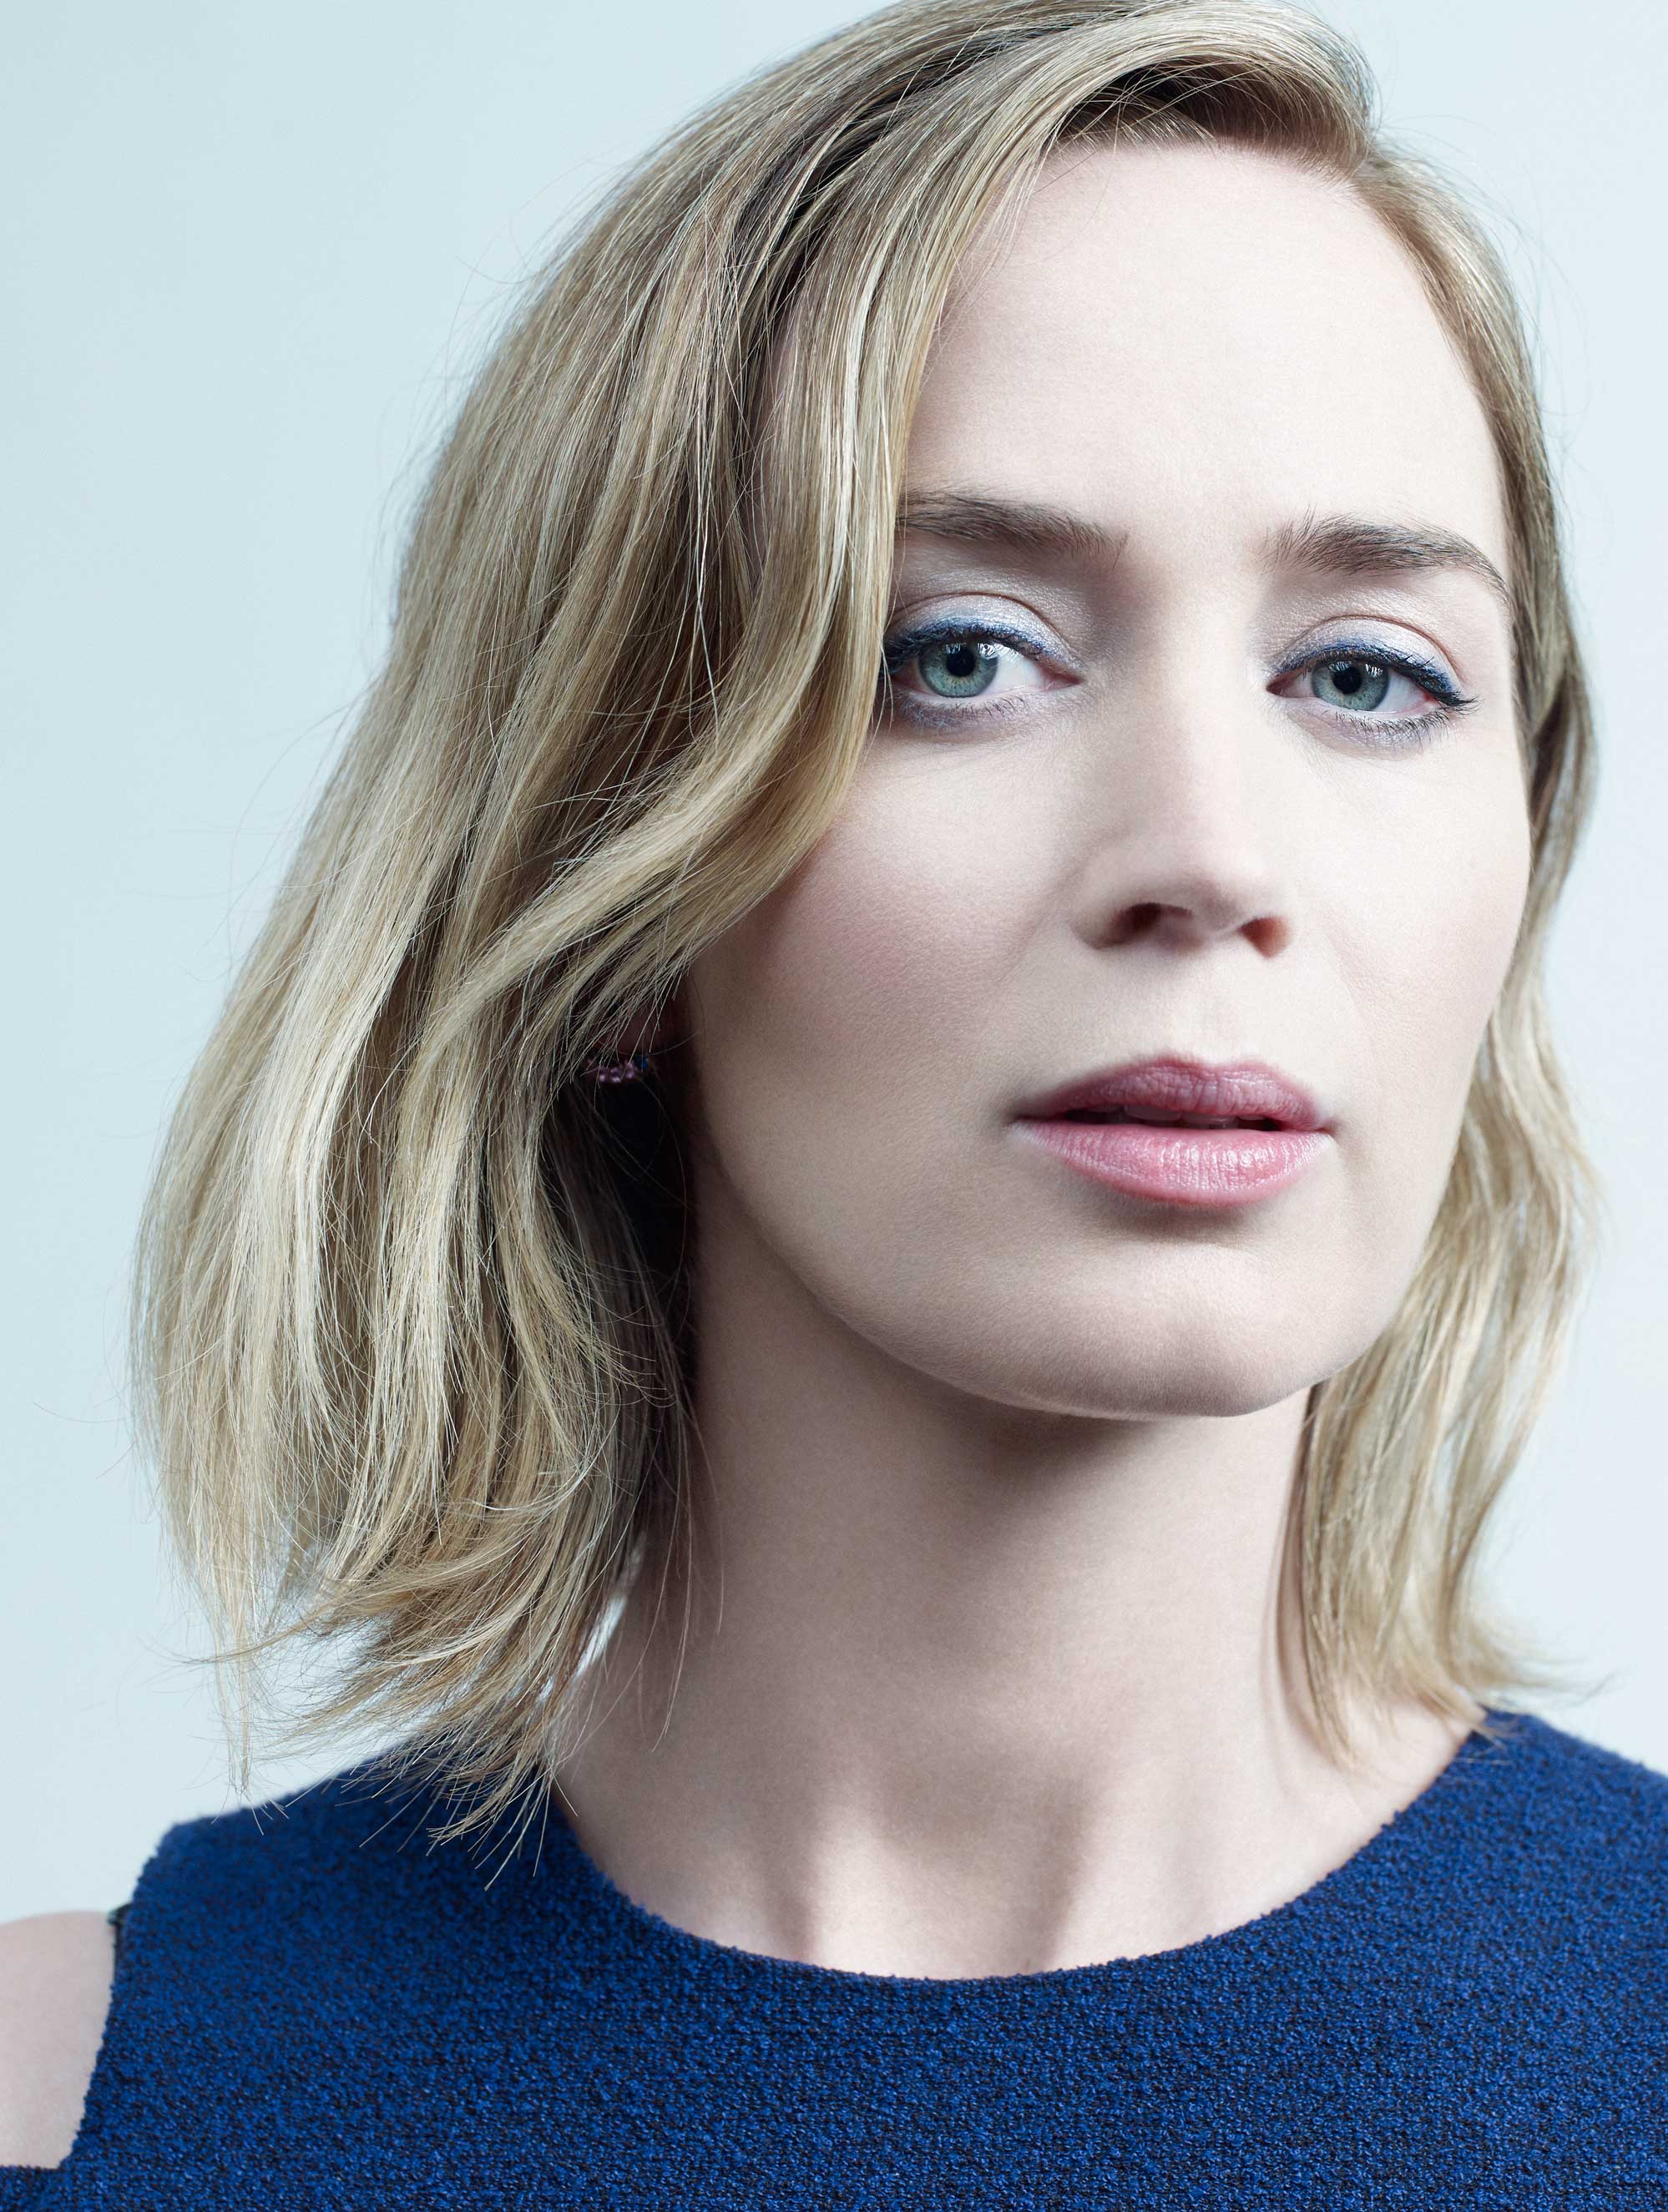 emily-blunt-peter-hapak-the-girl-on-the-train